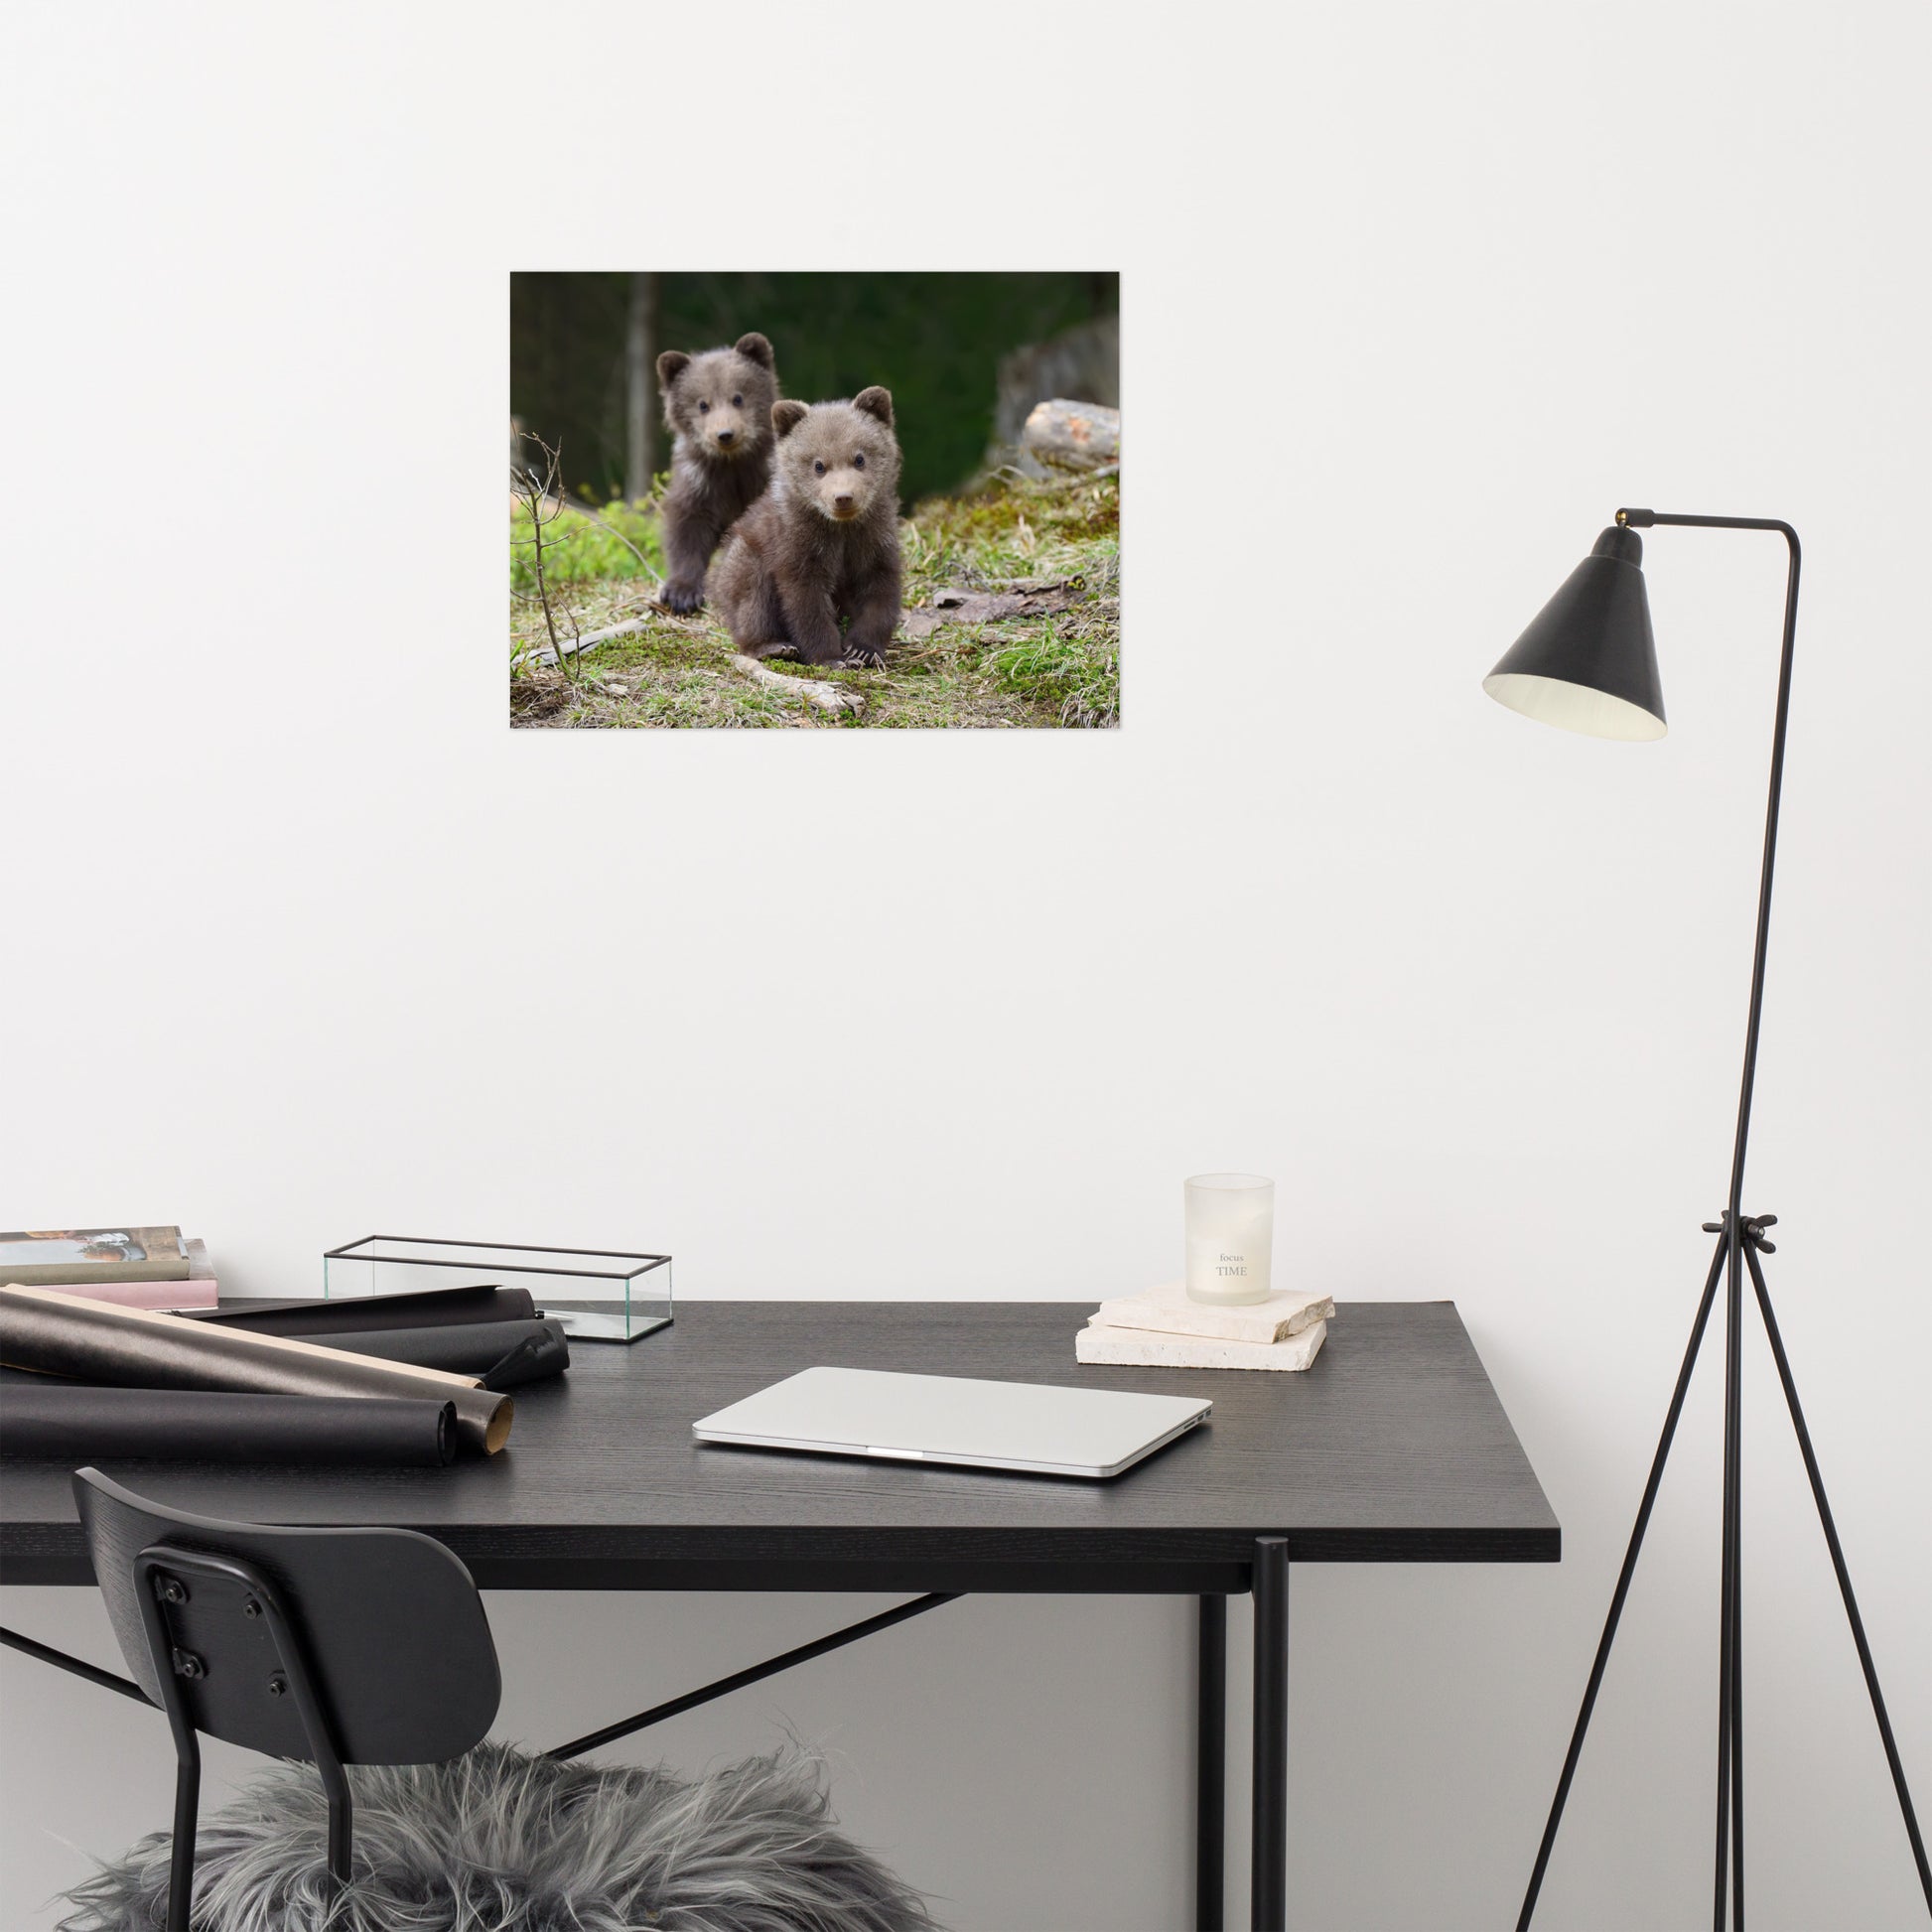 Play Room Prints: Adorable Grizzly Bear Cubs In The Trees Animal / Wildlife / Nature Photograph - Loose / Unframed / Frameable / Frameless Wall Art Print / Artwork